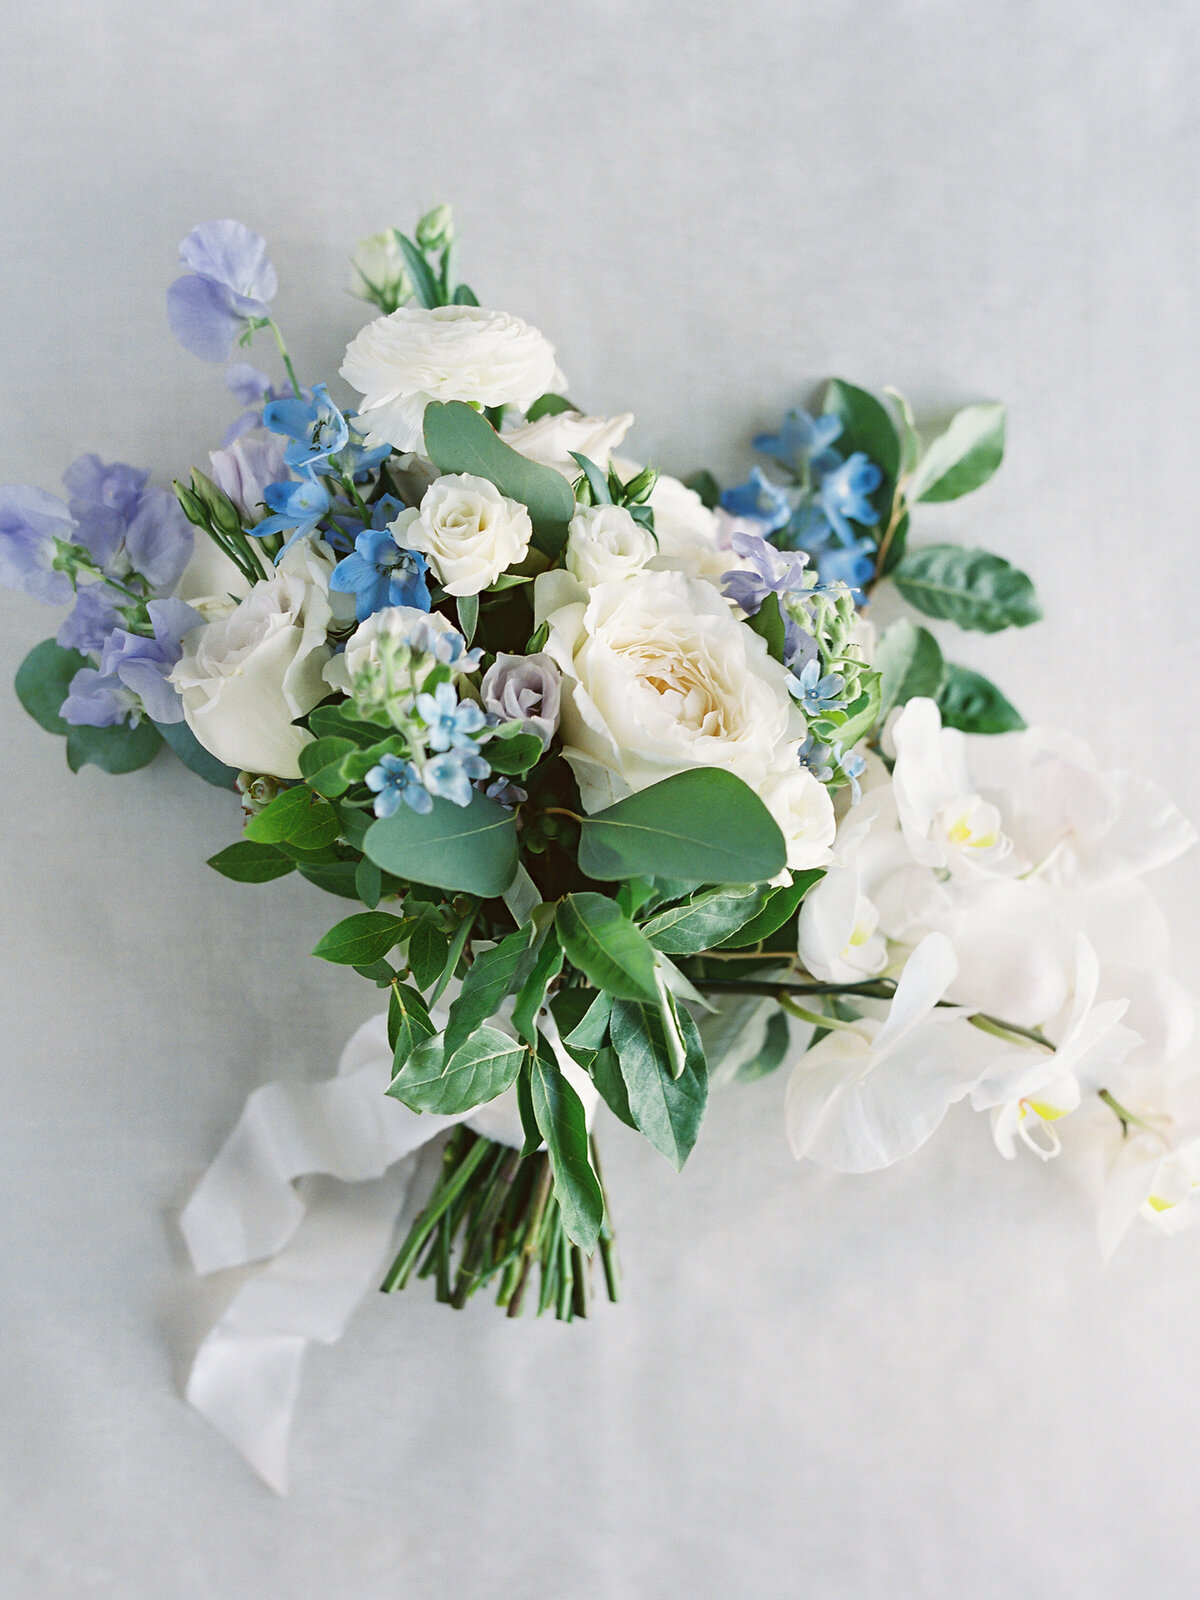 Kate Campbell Floral cream blue and lavender bridal bouquet sweet pea garden roses tweedia